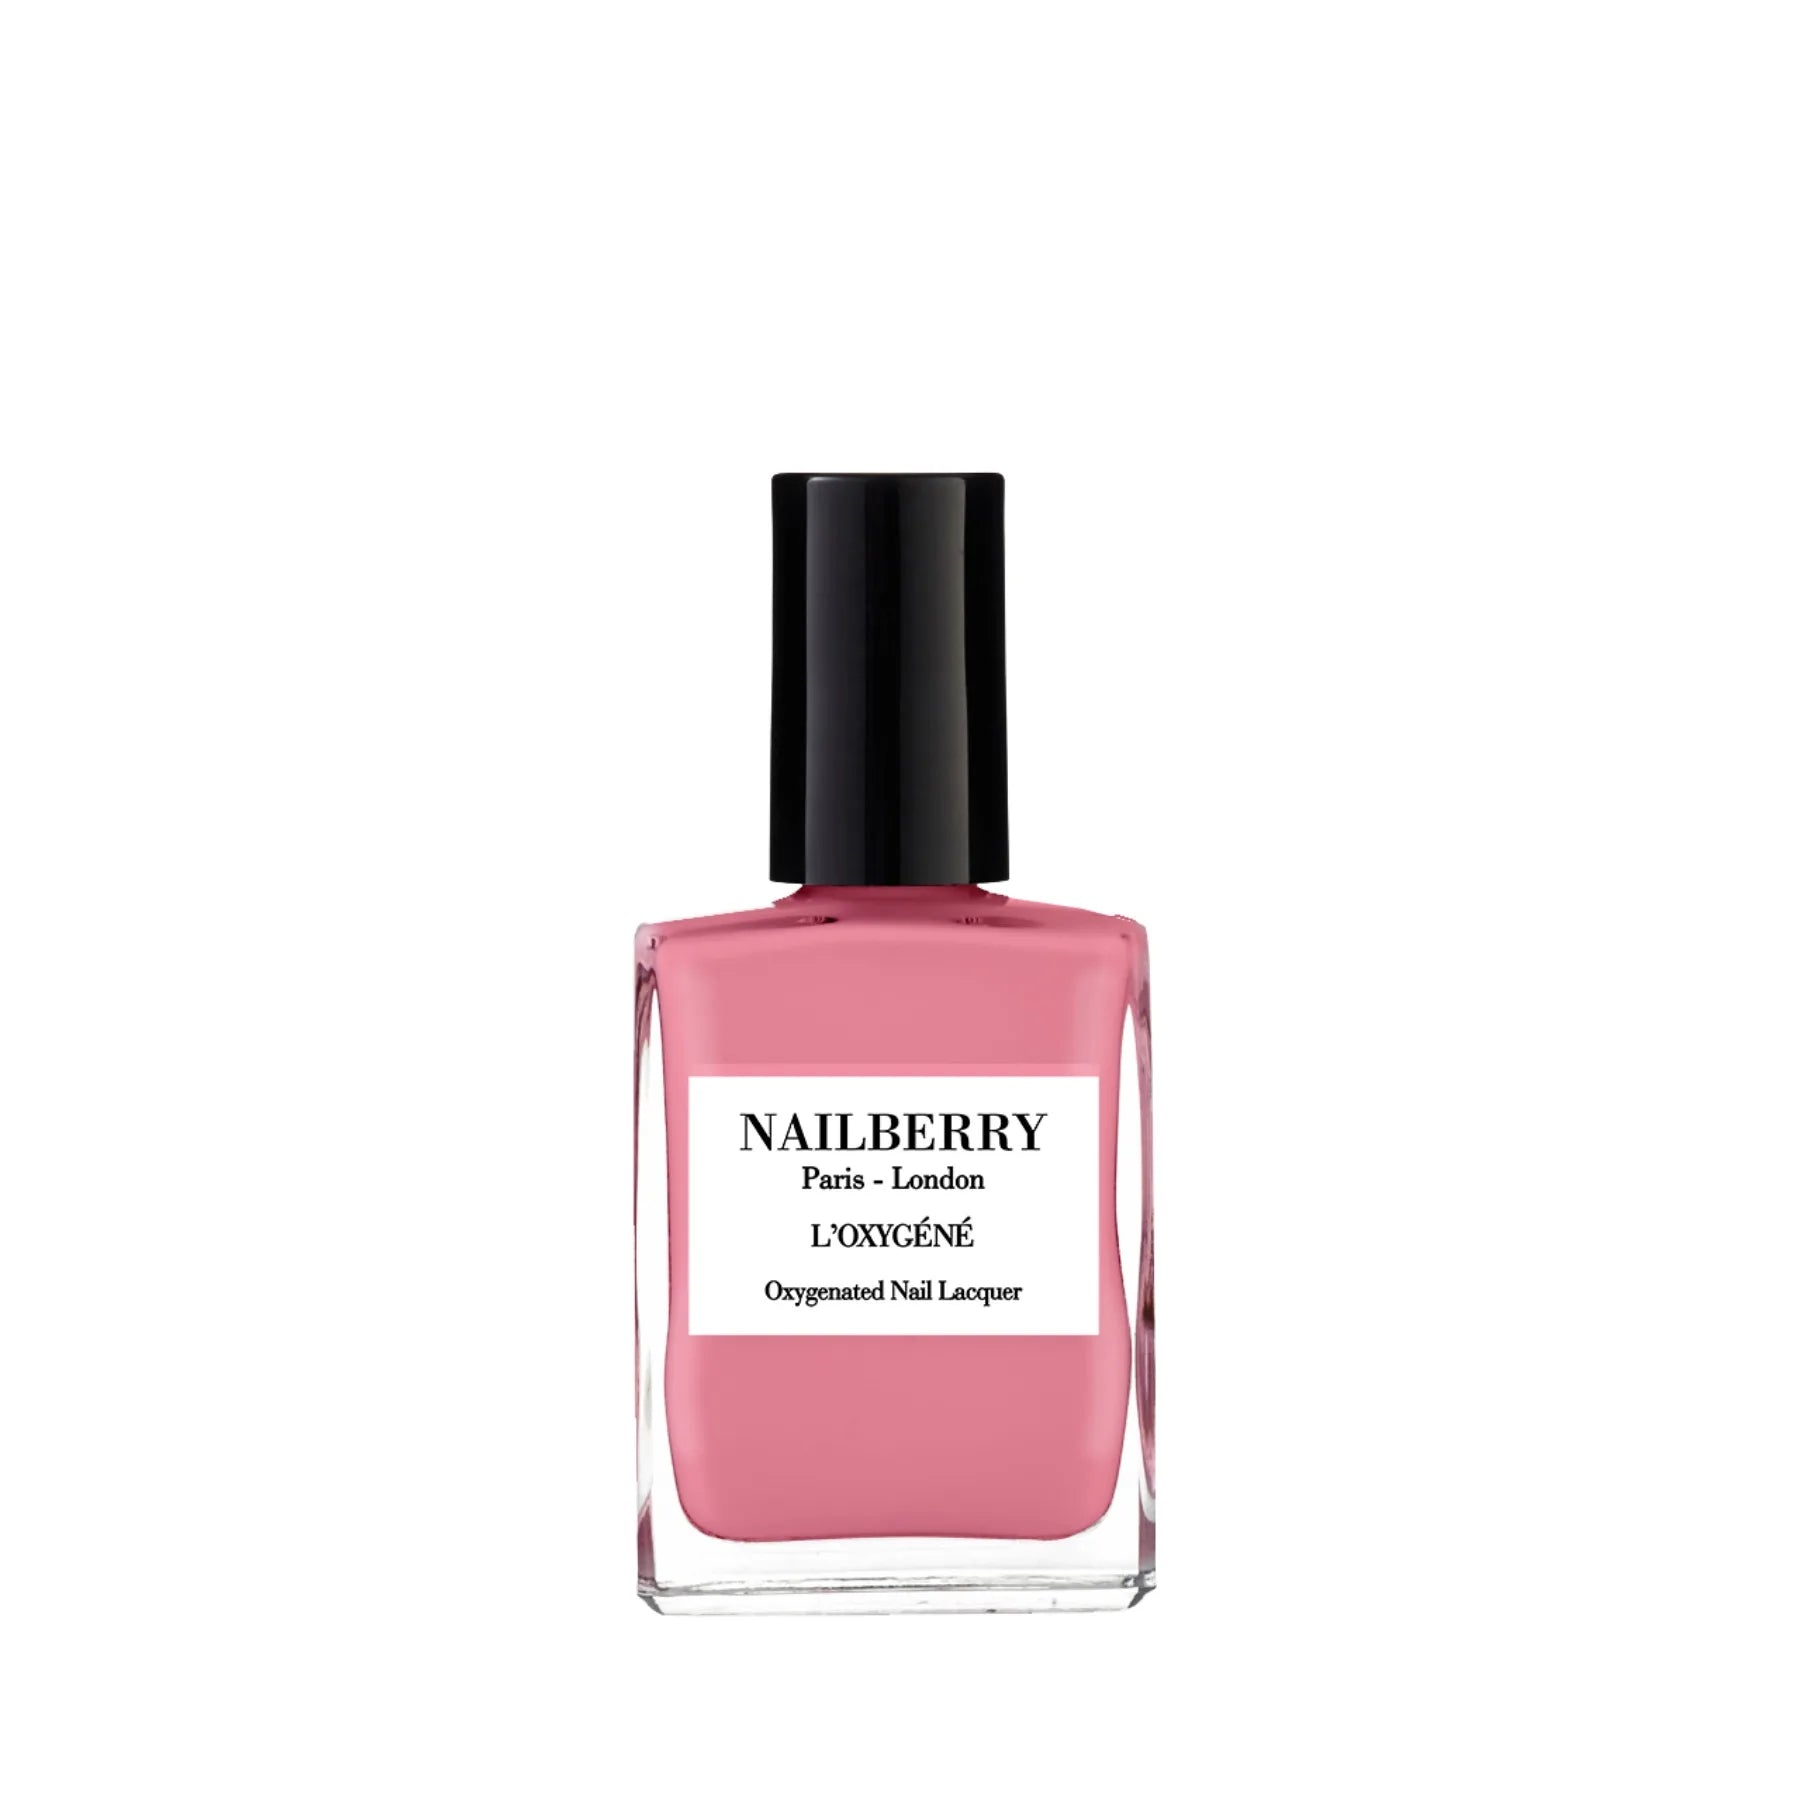 Nailberry kindness